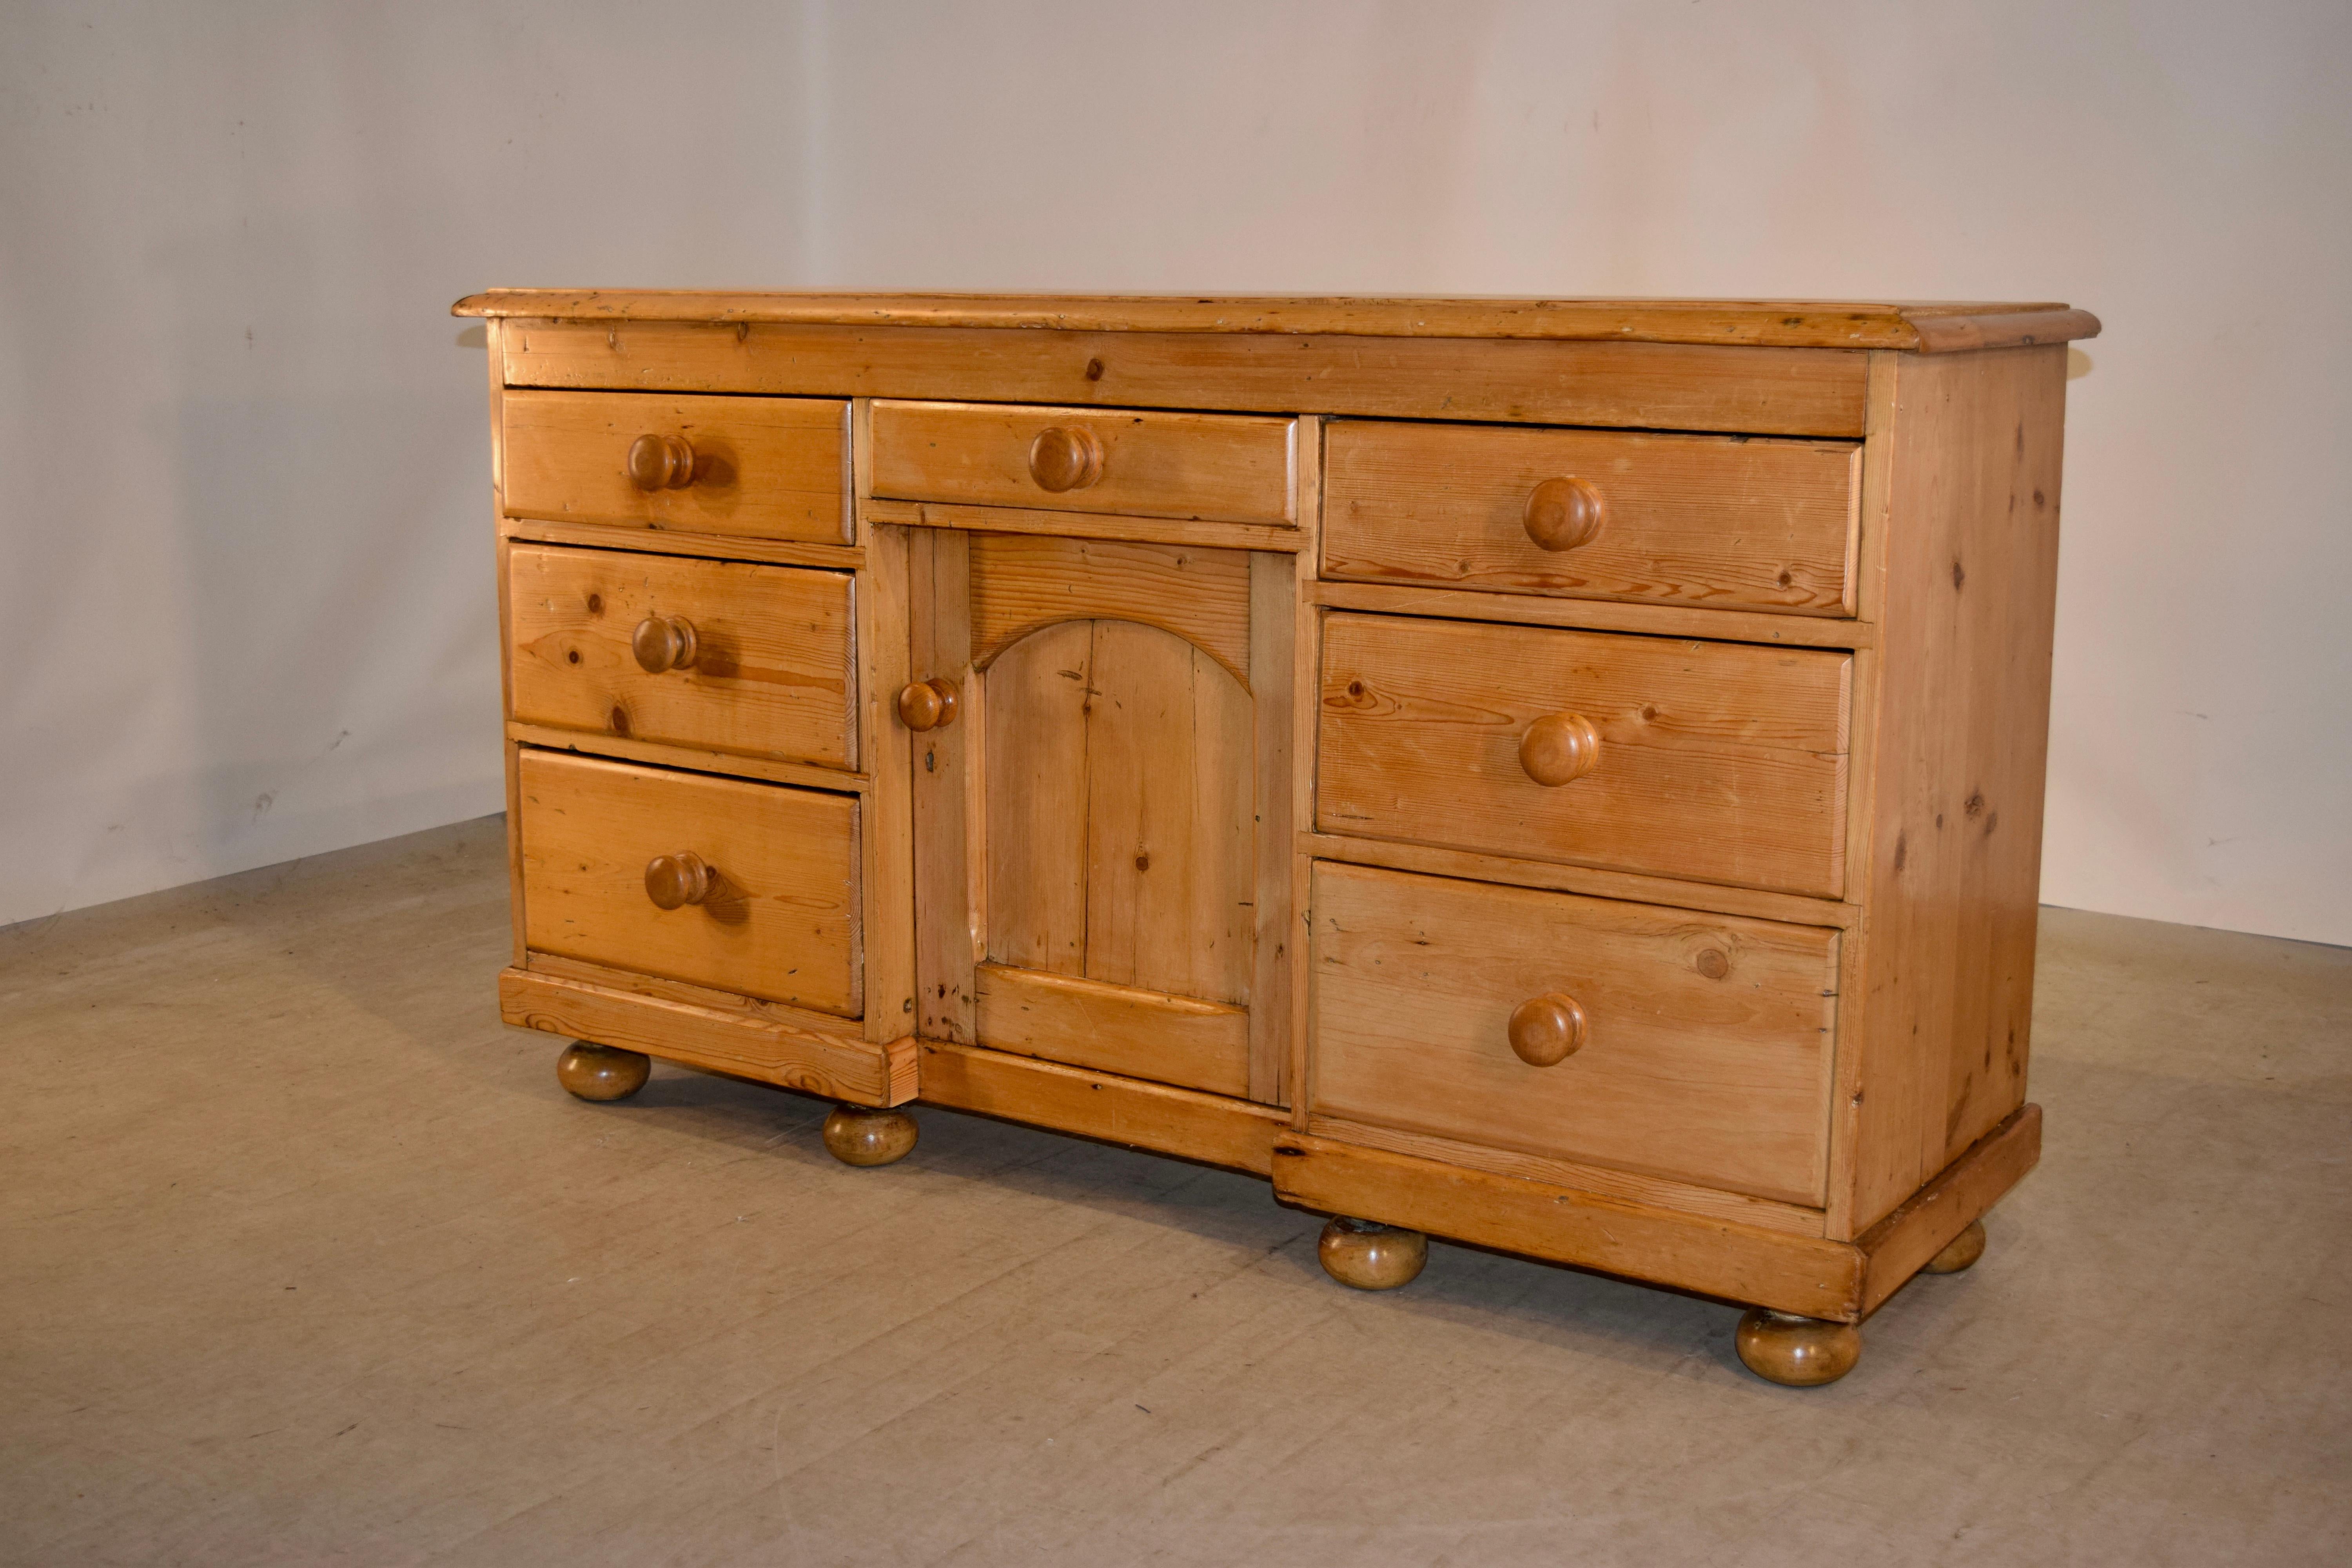 19th century pine dresser base from England with a three board top which has a beveled edge, following down to simple sides and a central drawer over a single recessed door, which opens to reveal shelving. This is flanked by two stacks of three